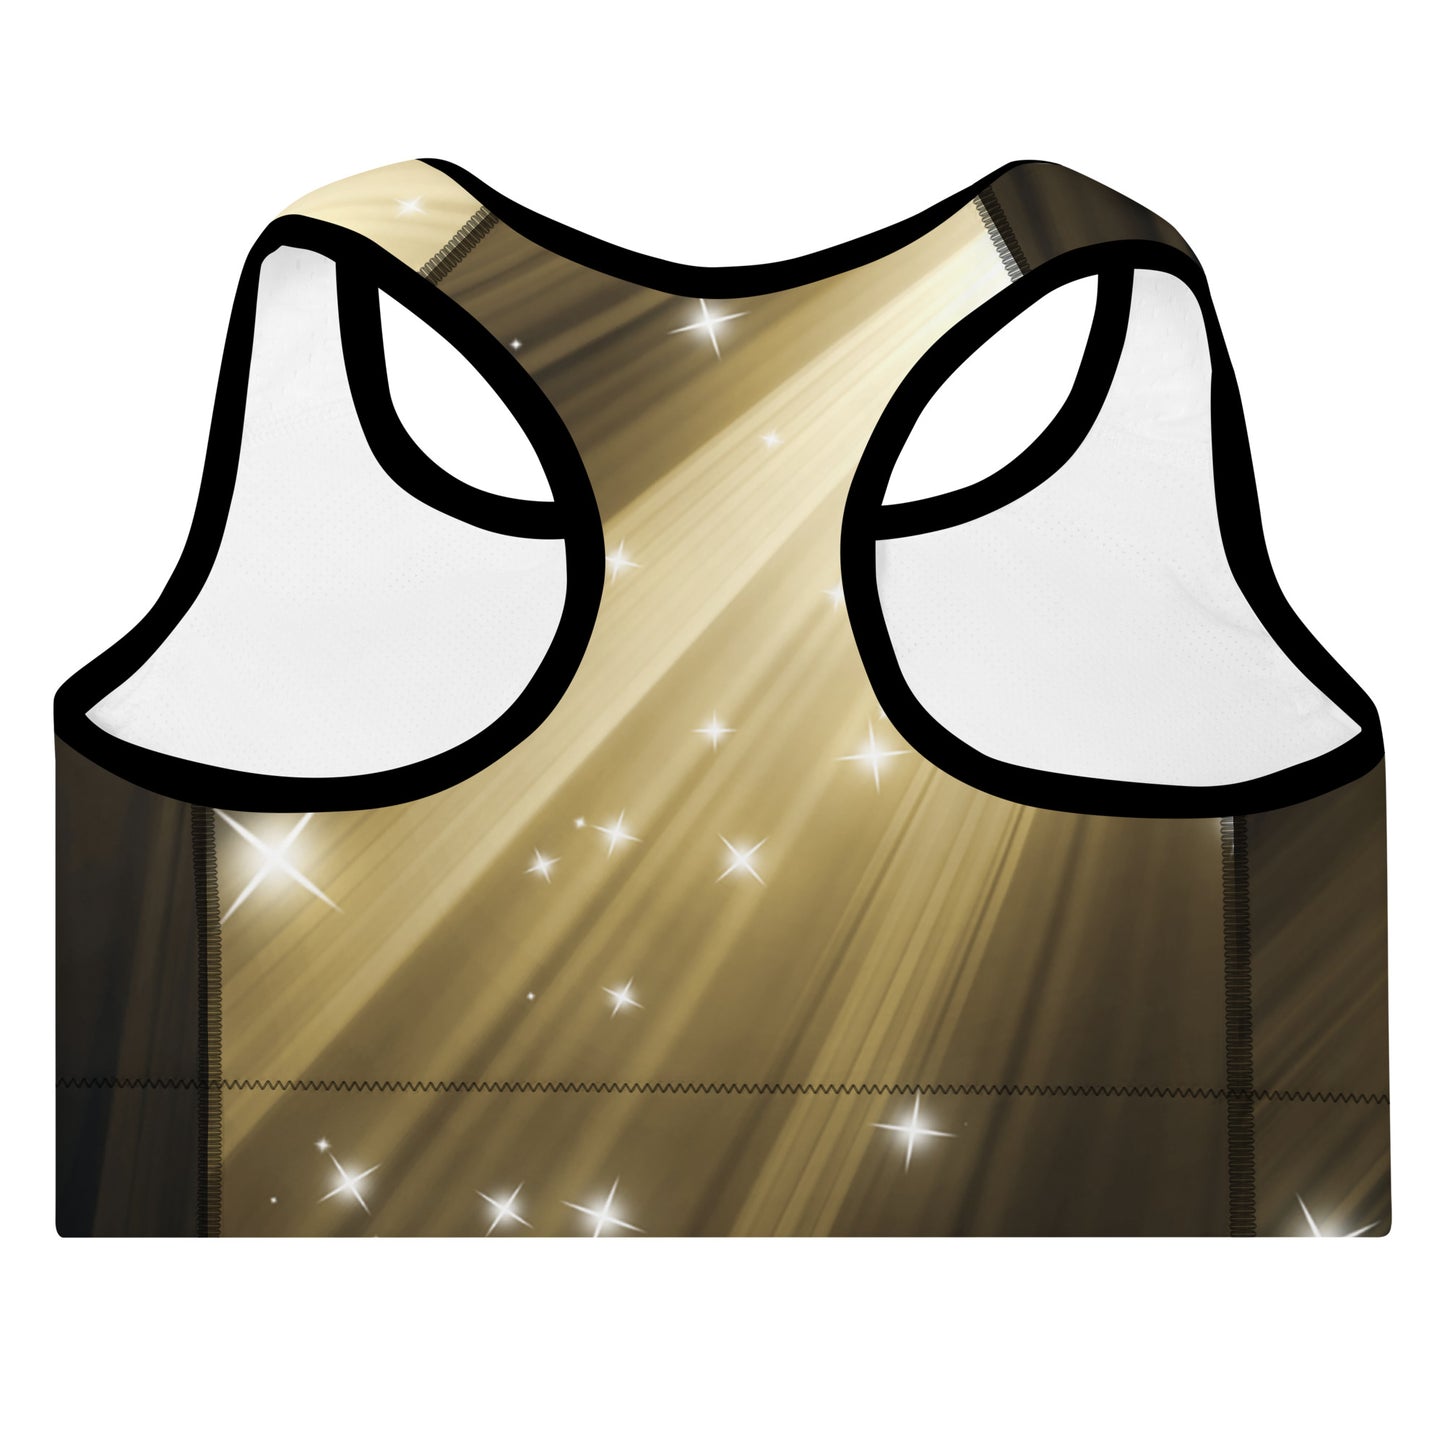 Ready to shine? Embrace the artistry within you with the Gold Spotlyght Padded Sports Bra. 🌟💪"